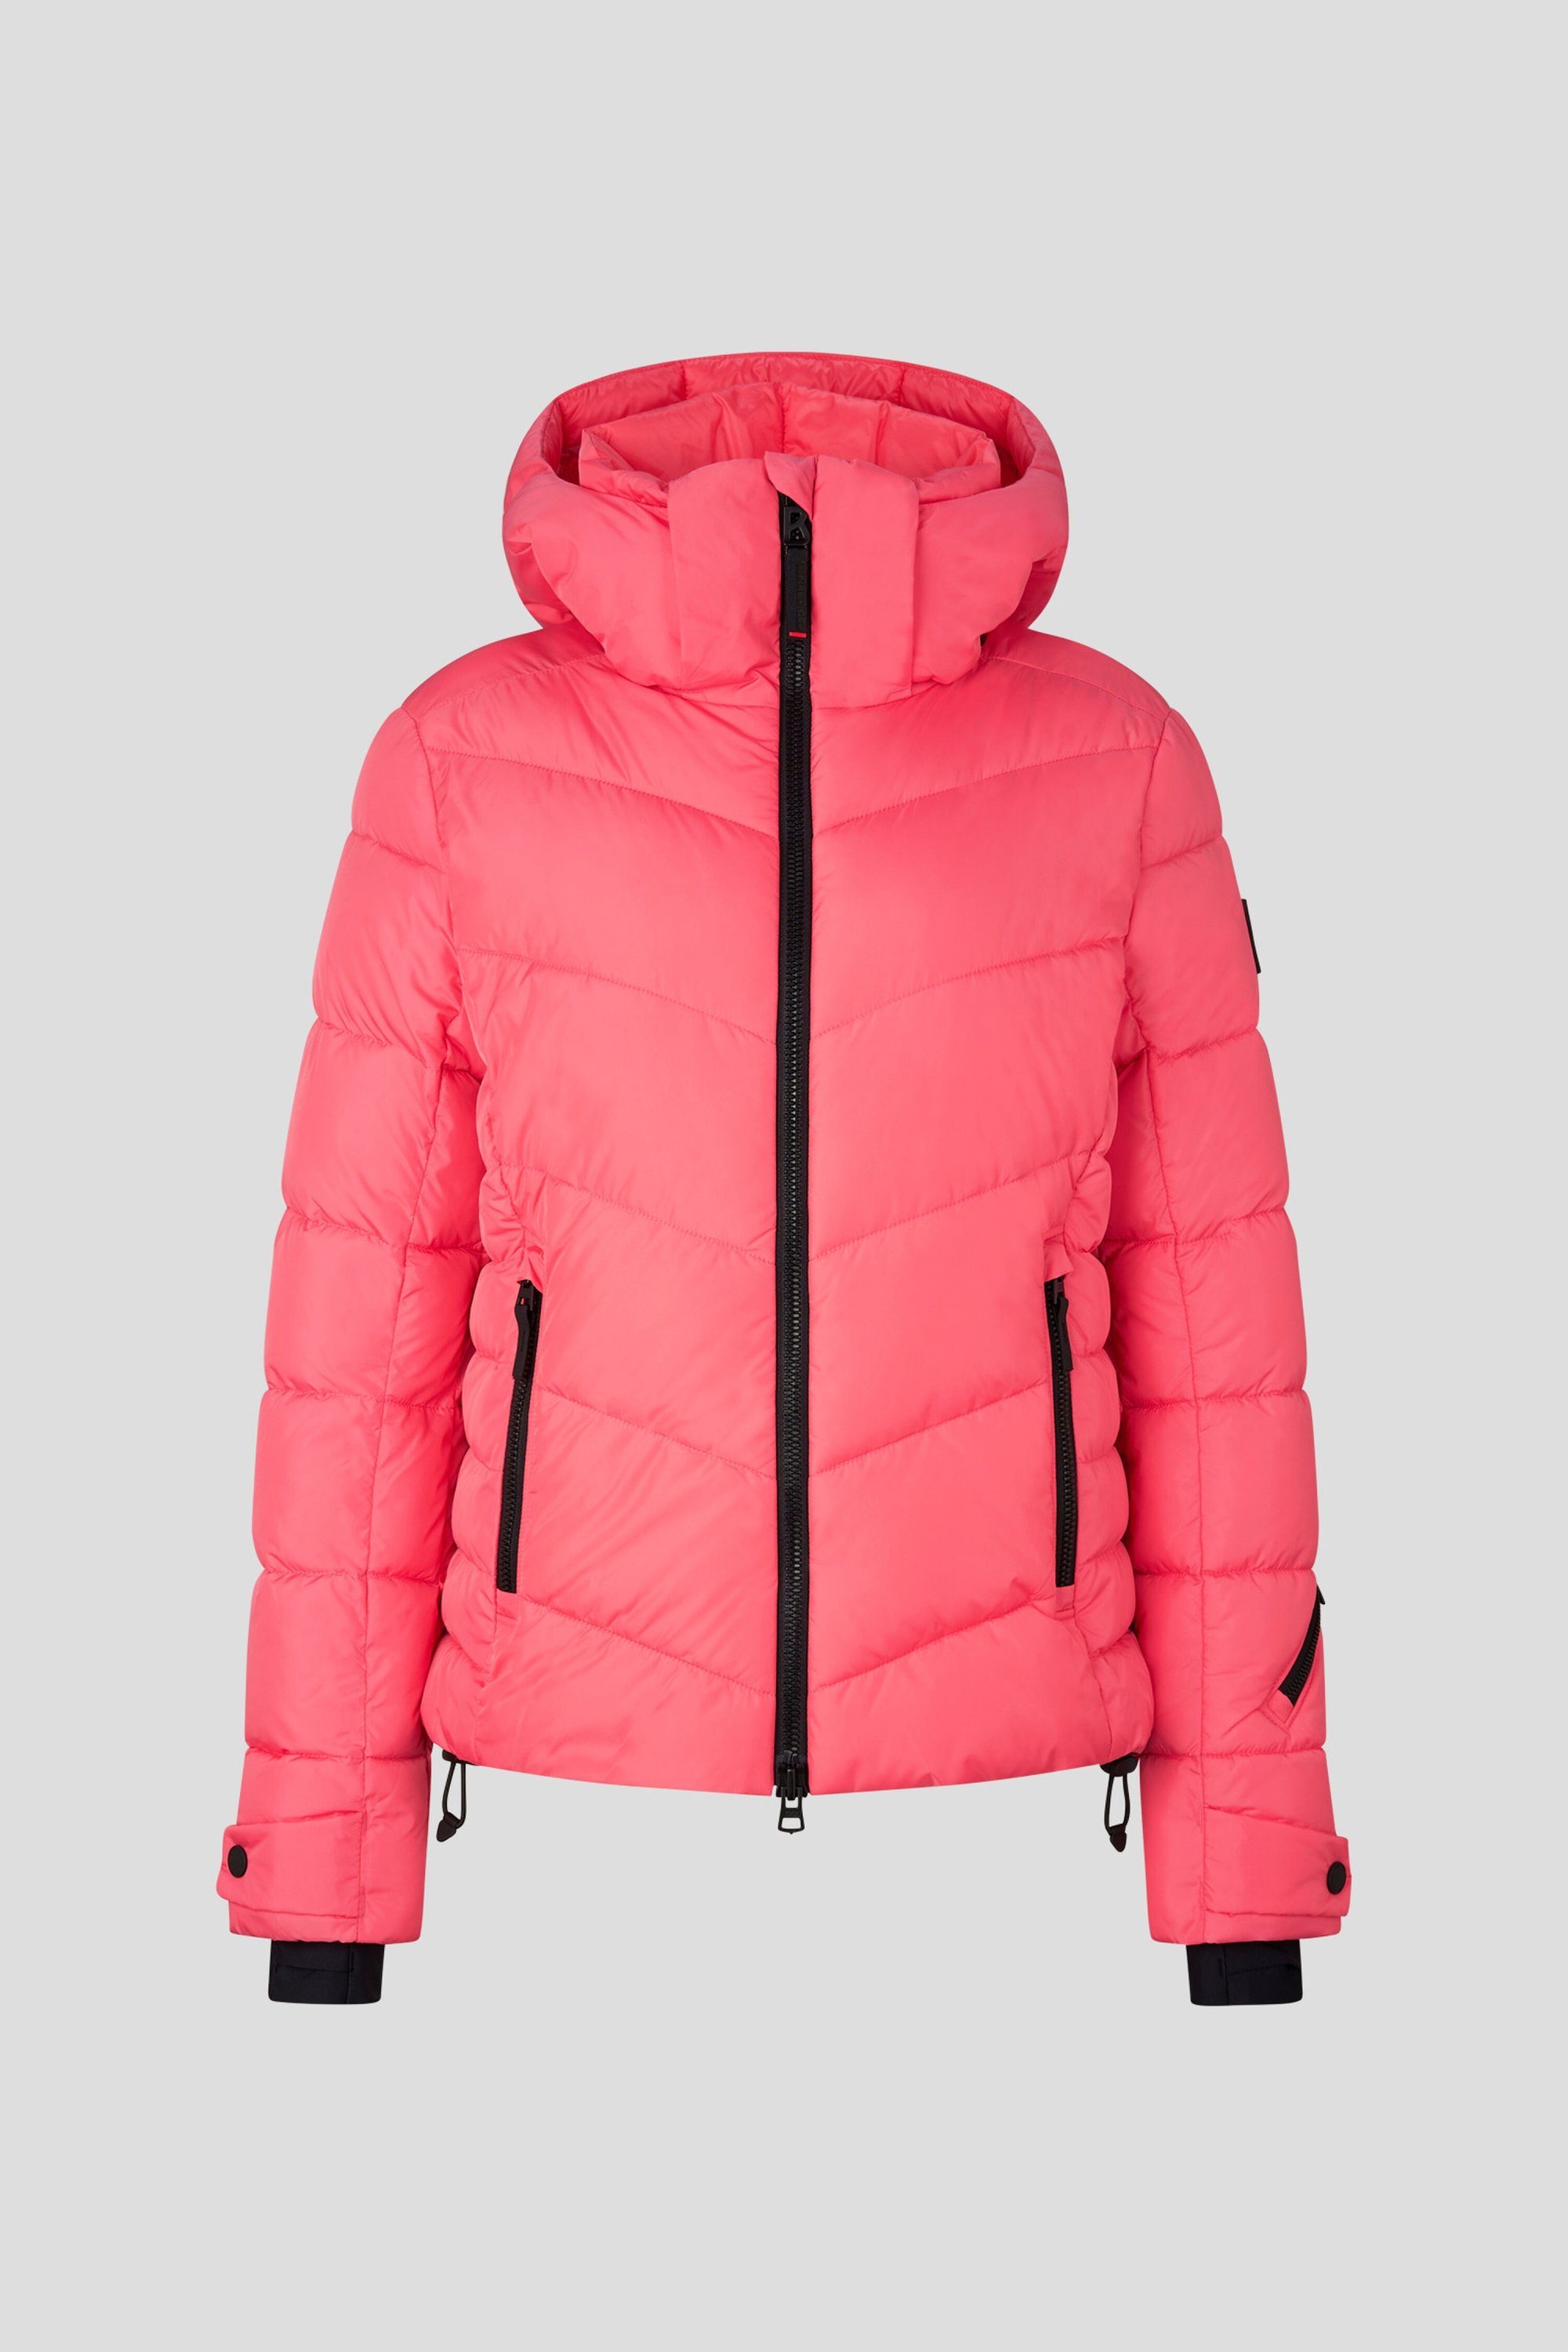 Bogner Fire + Ice Kapuzensweatjacke SAELLY2 coral pink